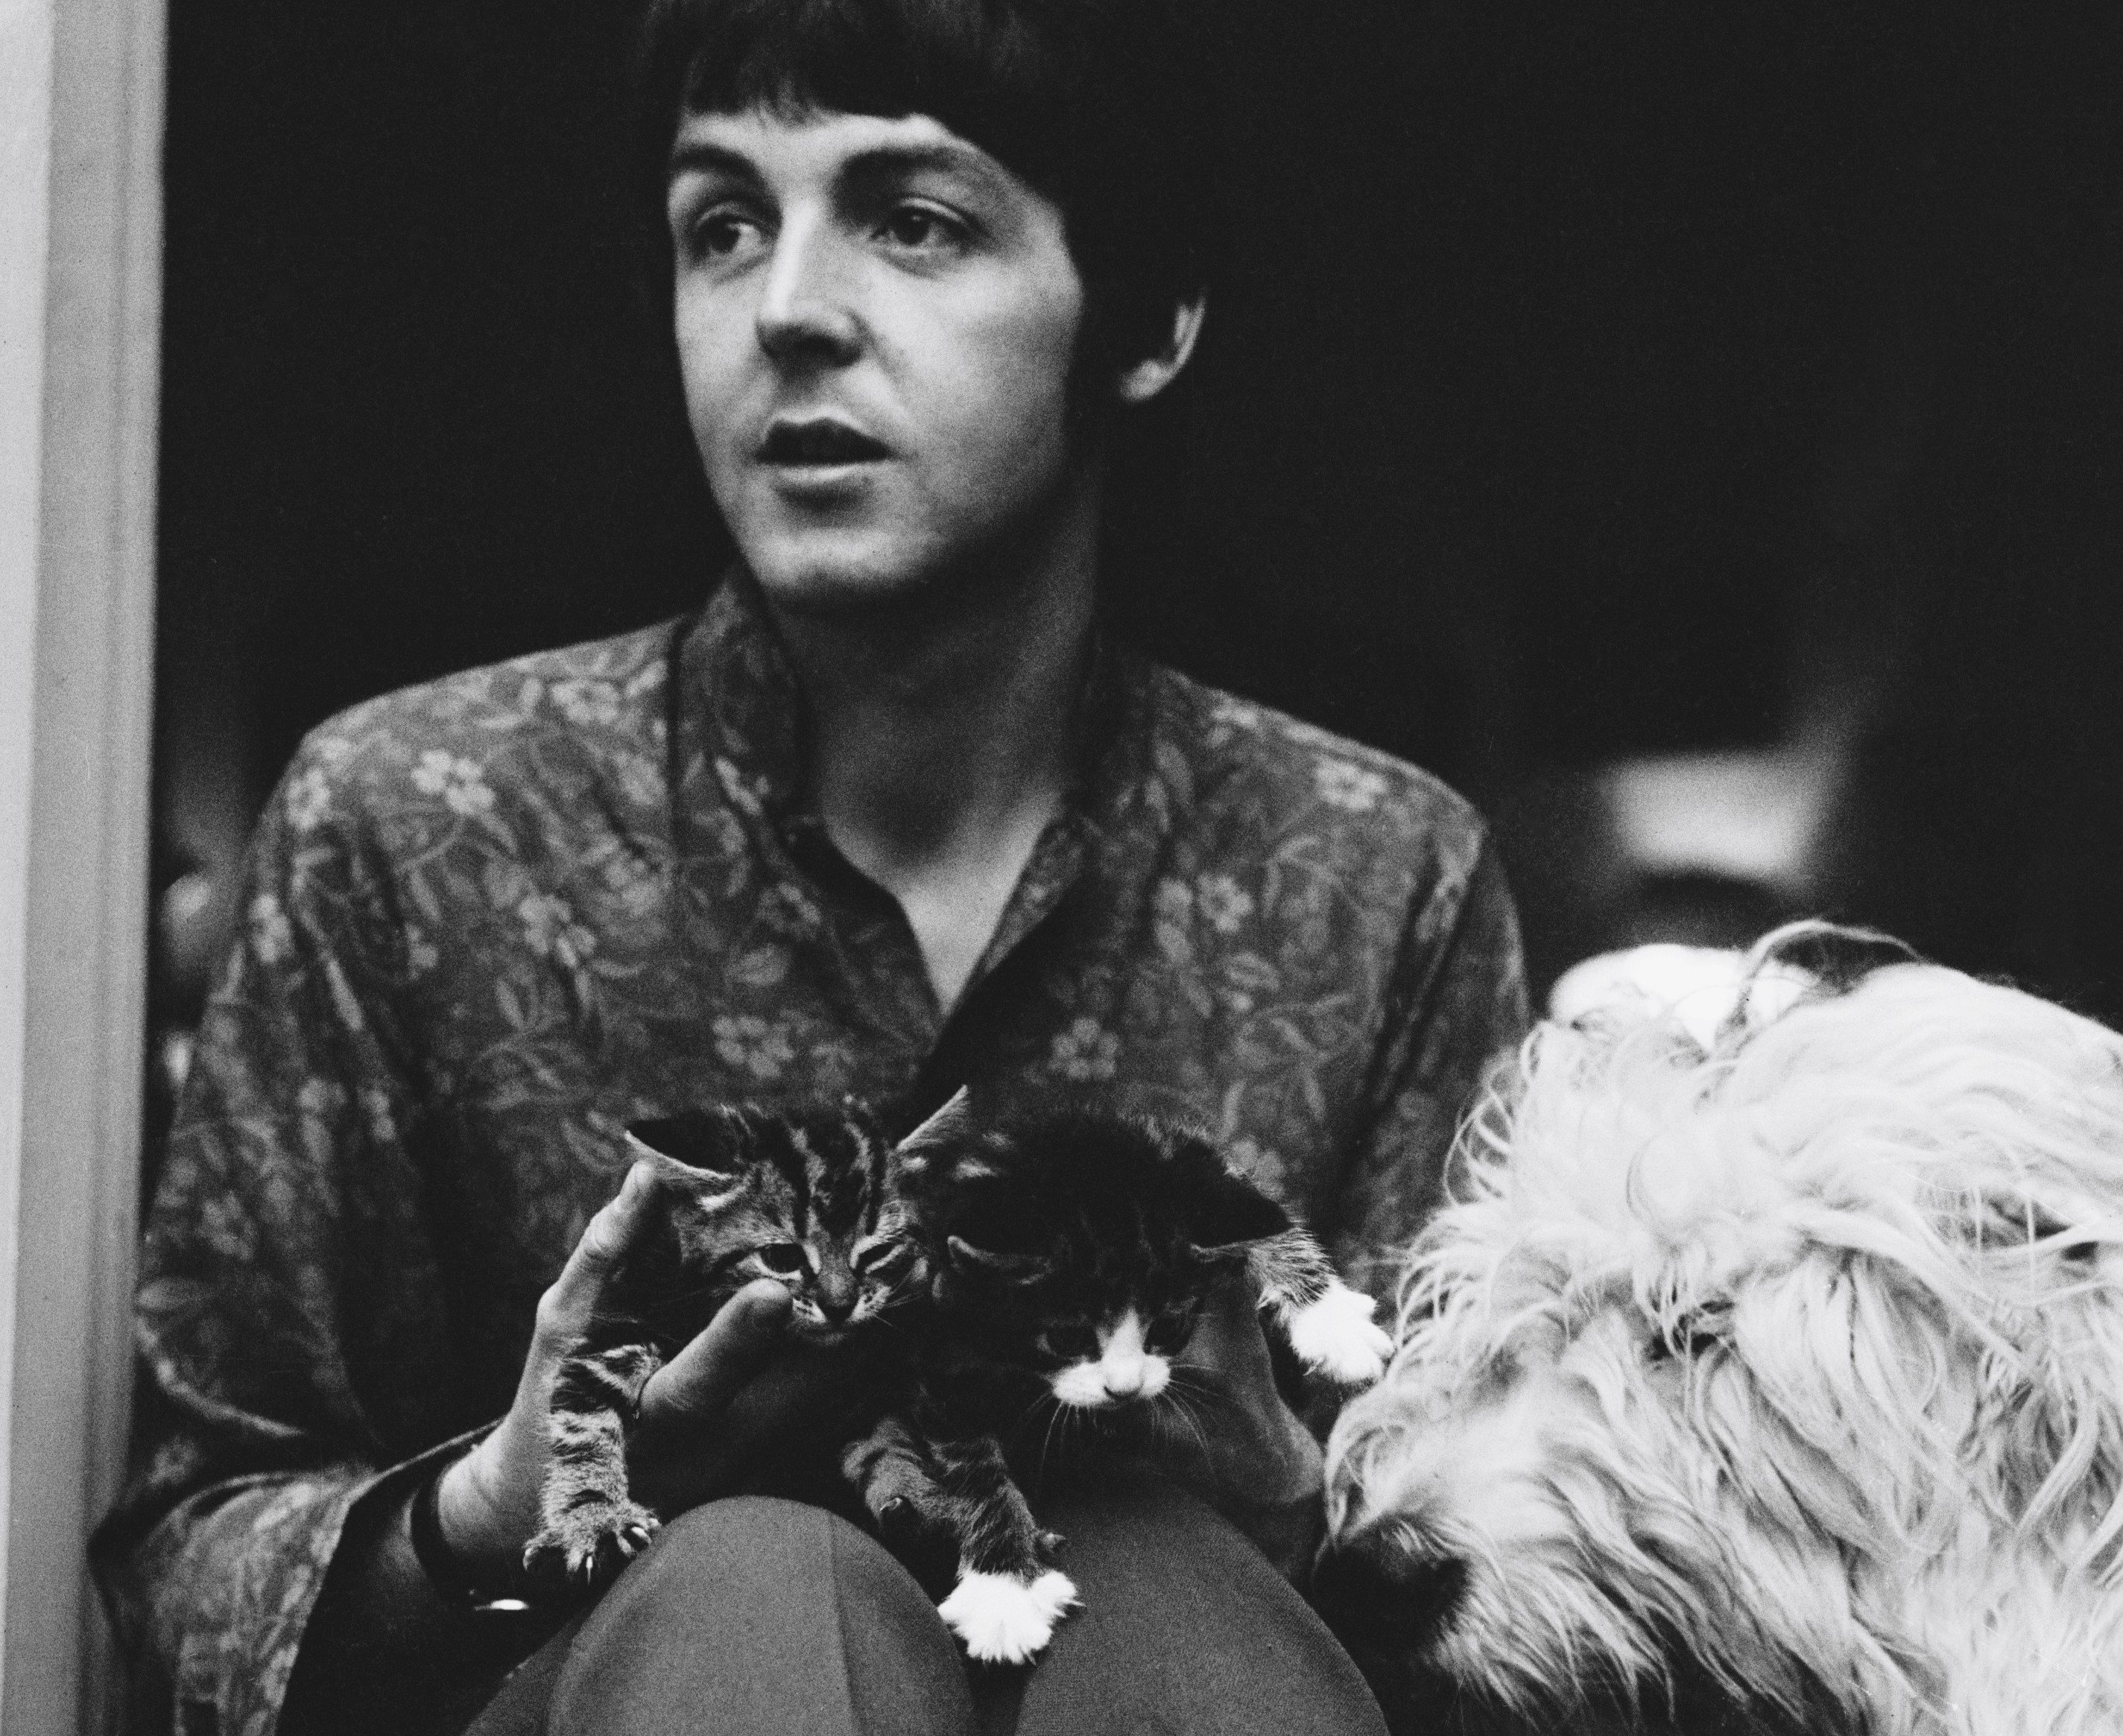 Paul McCartney with a dog during The Beatles' 'The White Album' era